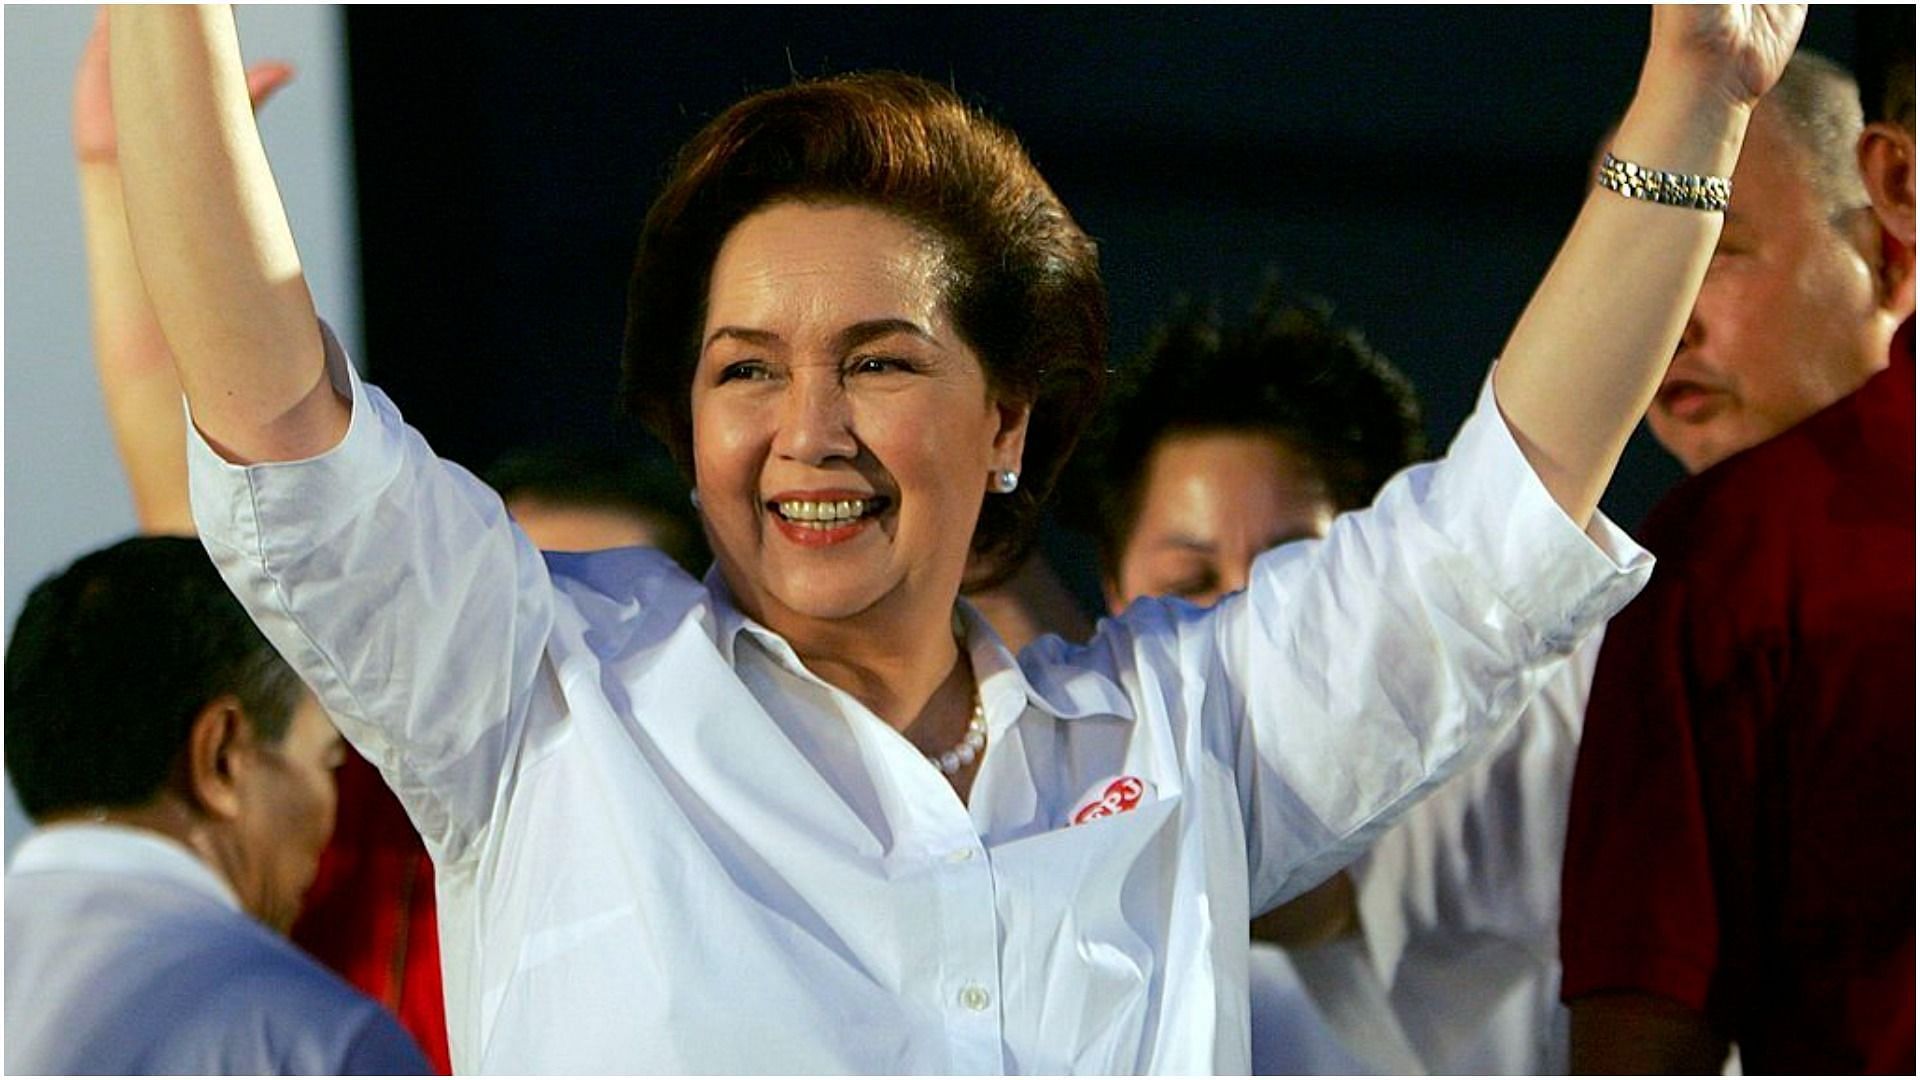 Susan Roces recently passed away at the age of 80 (Image via Paula Bronstein/Getty Images)